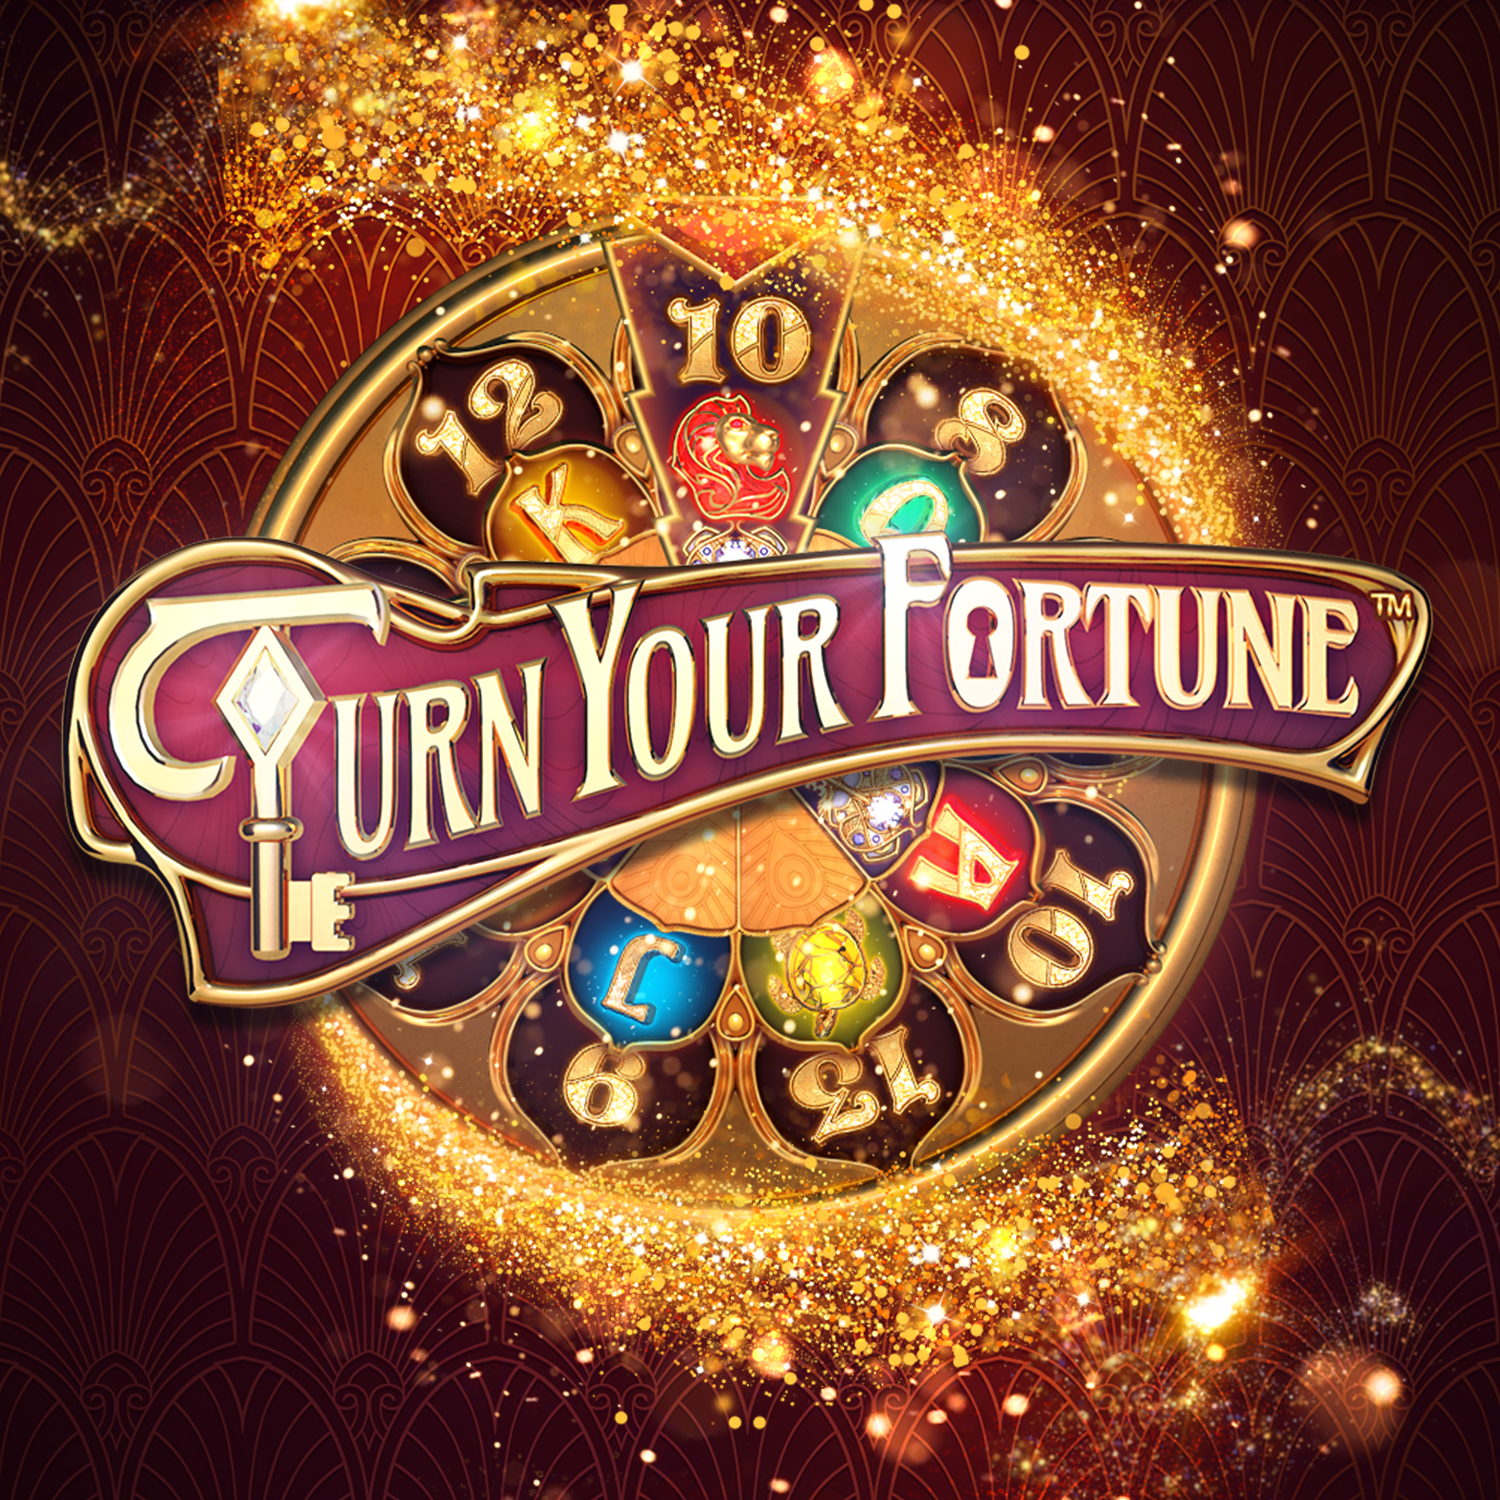 01_mobile_banner_1500x1500_turnyourfortune.png thumbnail